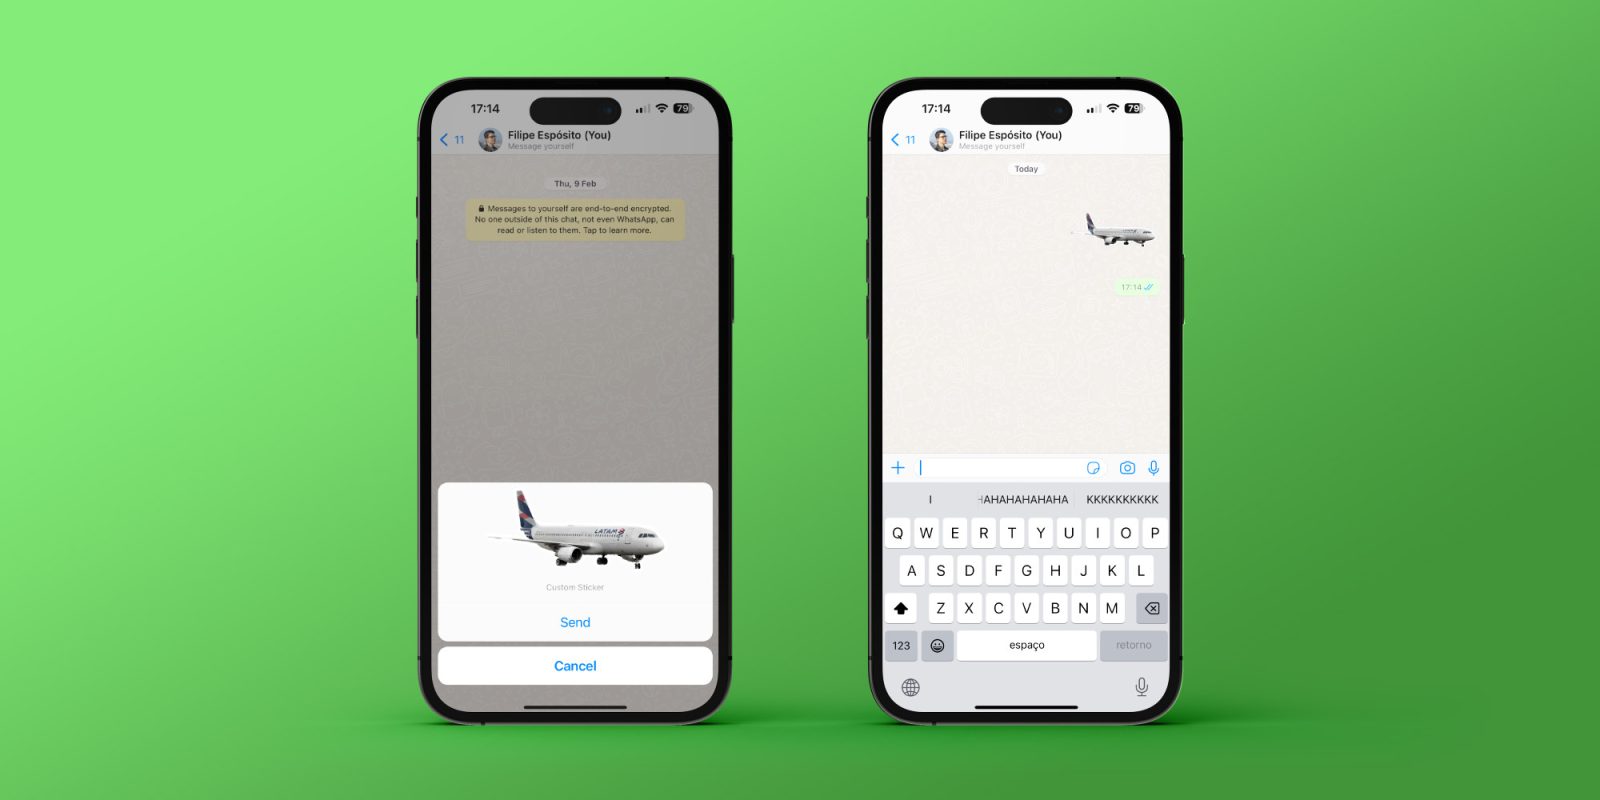 WhatsApp for iPhone now lets you easily create your own stickers from your photos